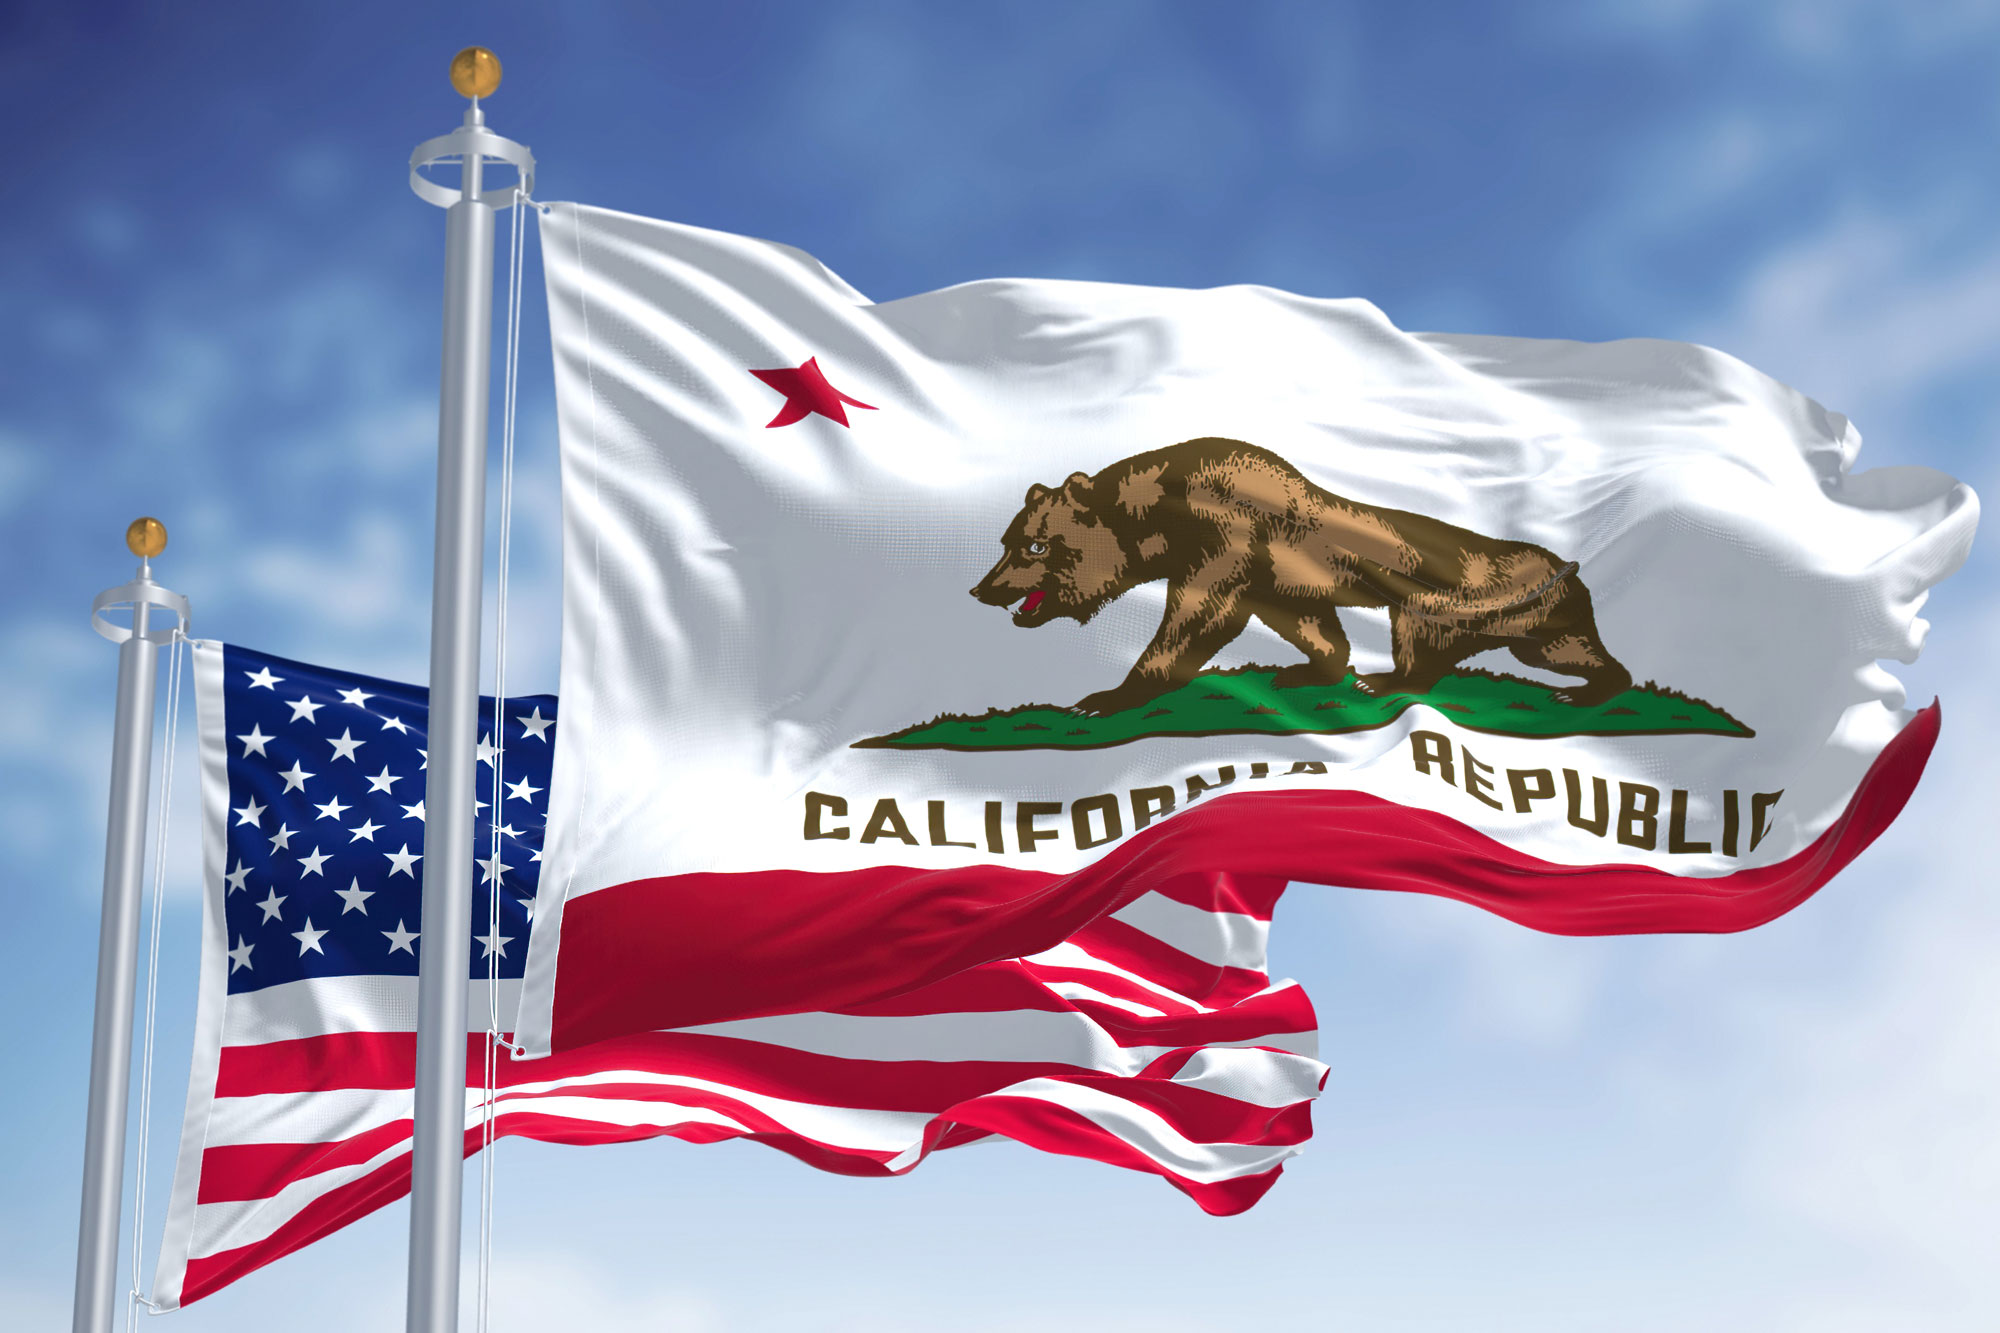 california-state-flag-waving-with-united-states-flag-public-policy